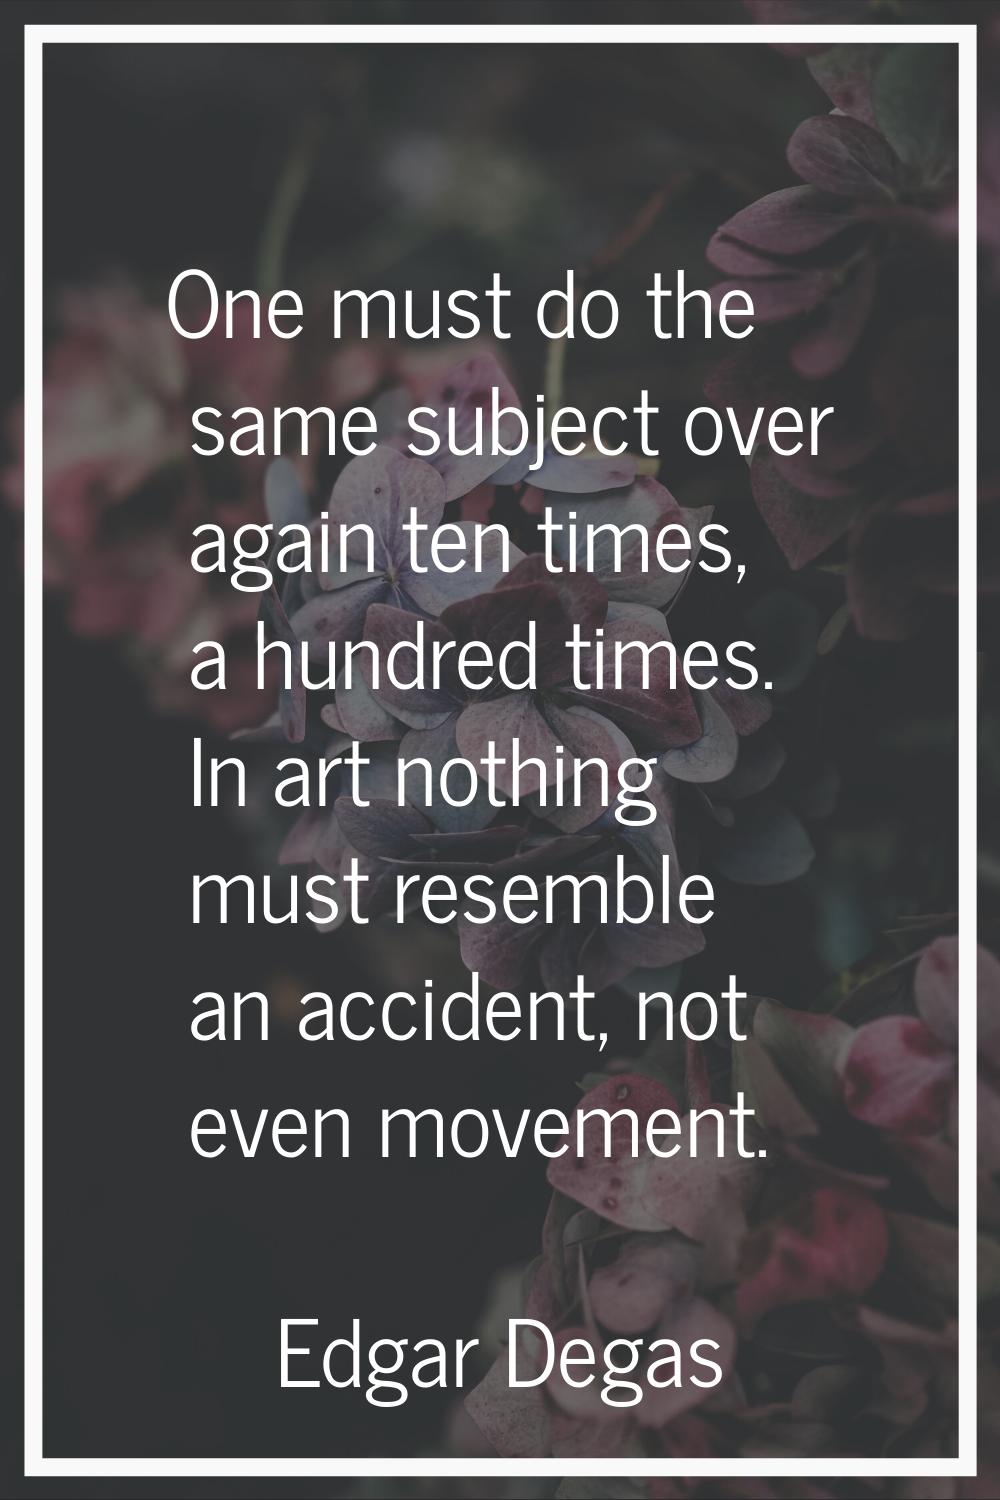 One must do the same subject over again ten times, a hundred times. In art nothing must resemble an